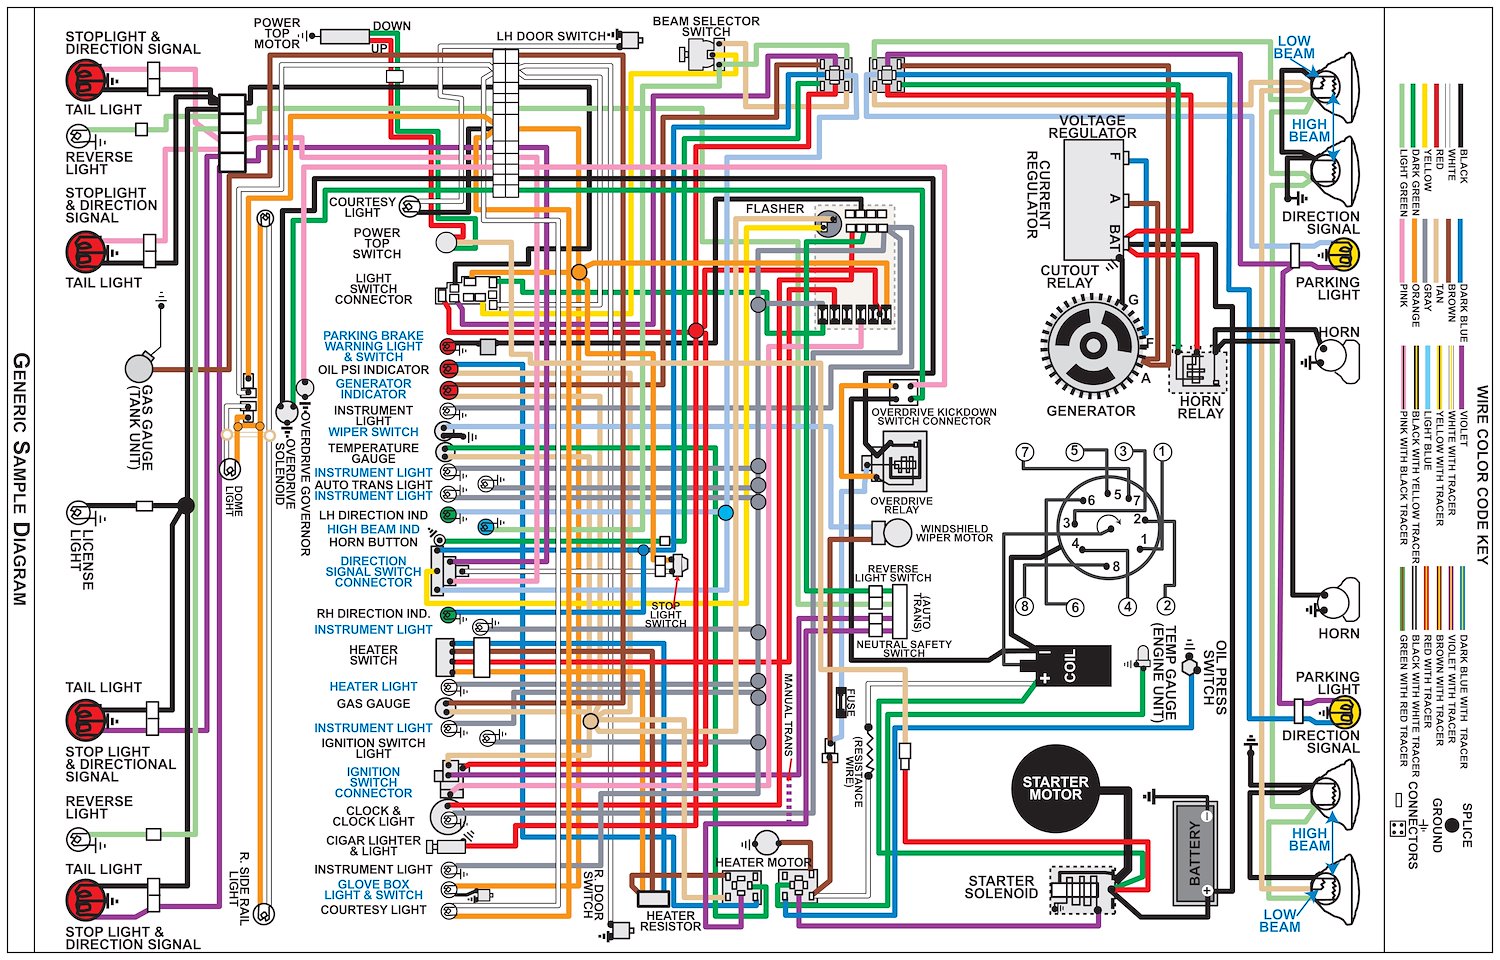 Wiring Diagram for 1965 Ford F-Series Truck, 11 in x 17 in., Laminated